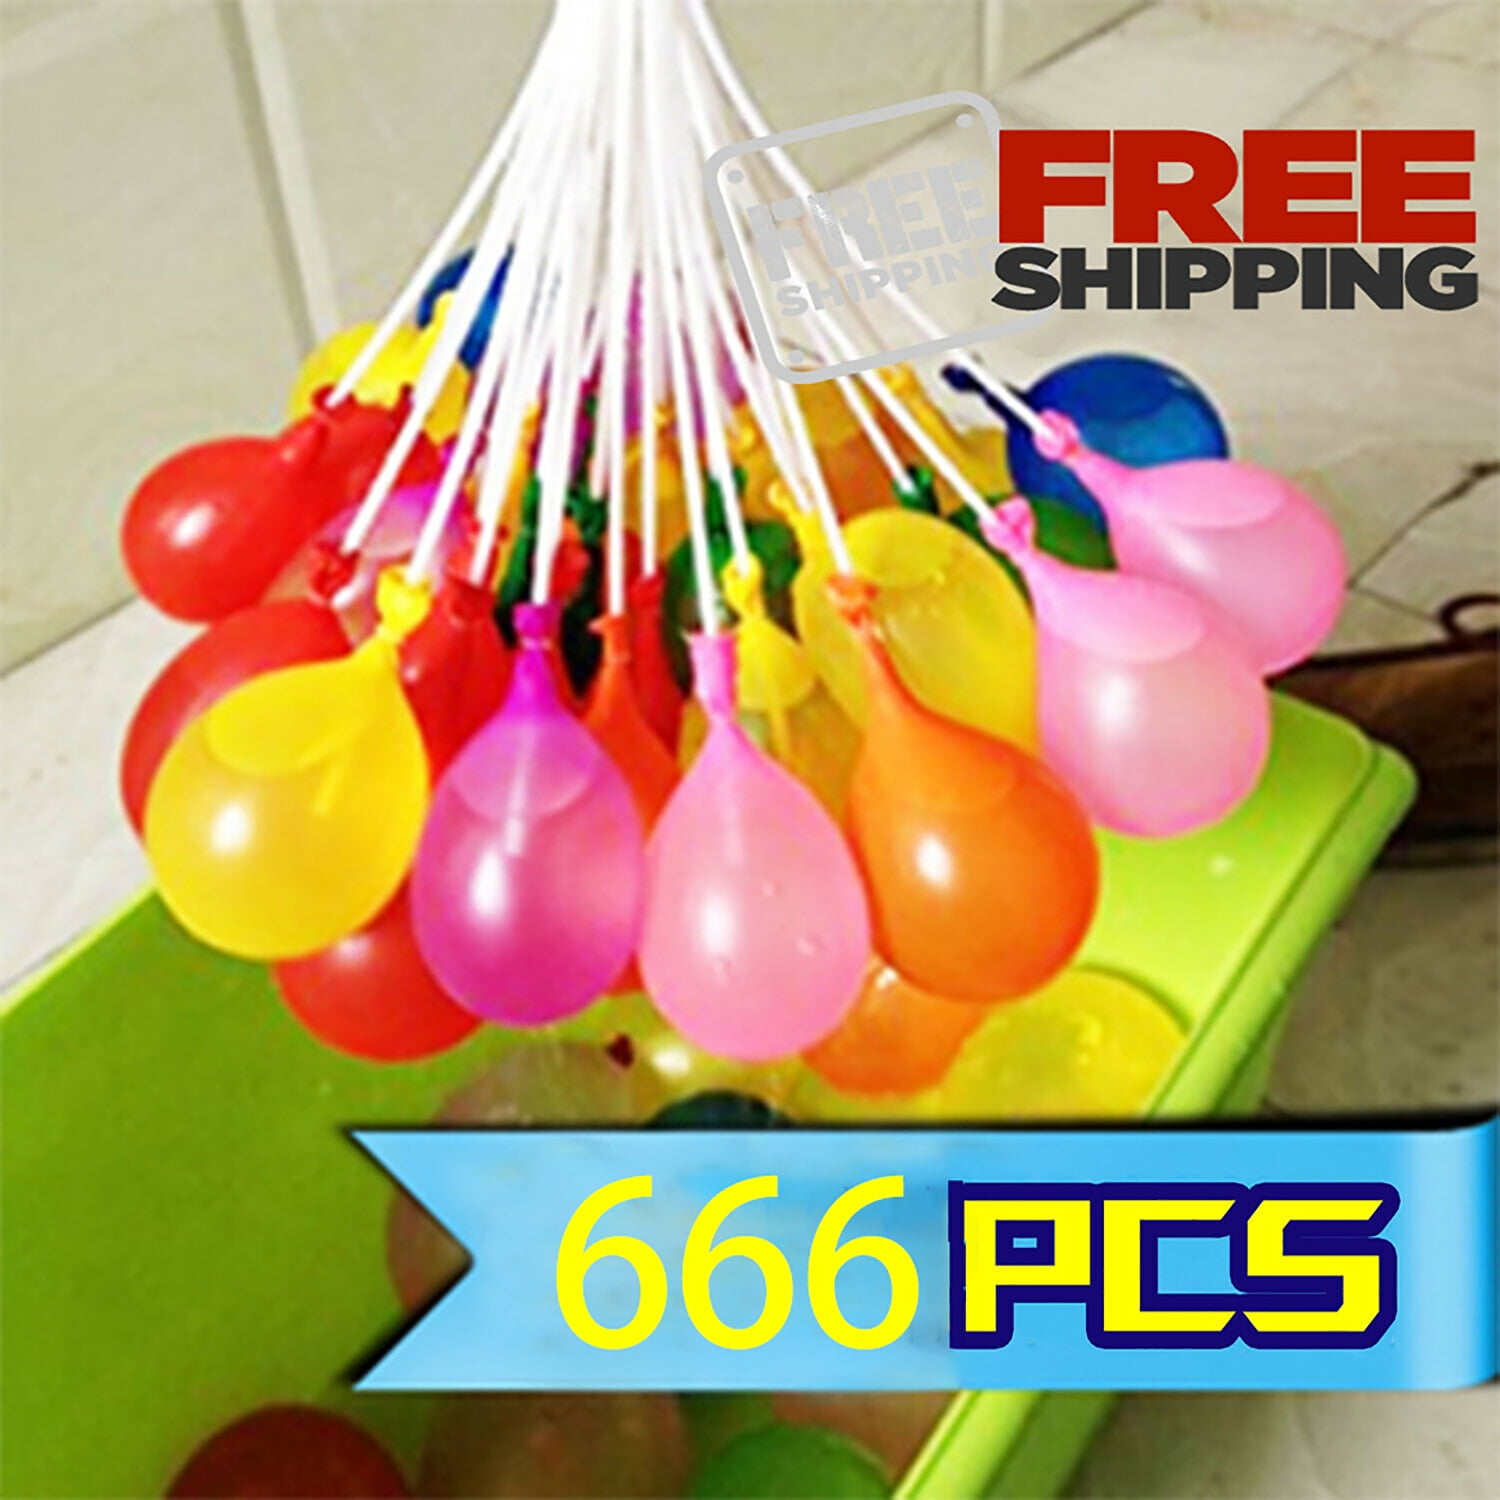 Water Balloons water Bombs Kid's Outdoor Game Summer Party Fun Bag 50 pcs